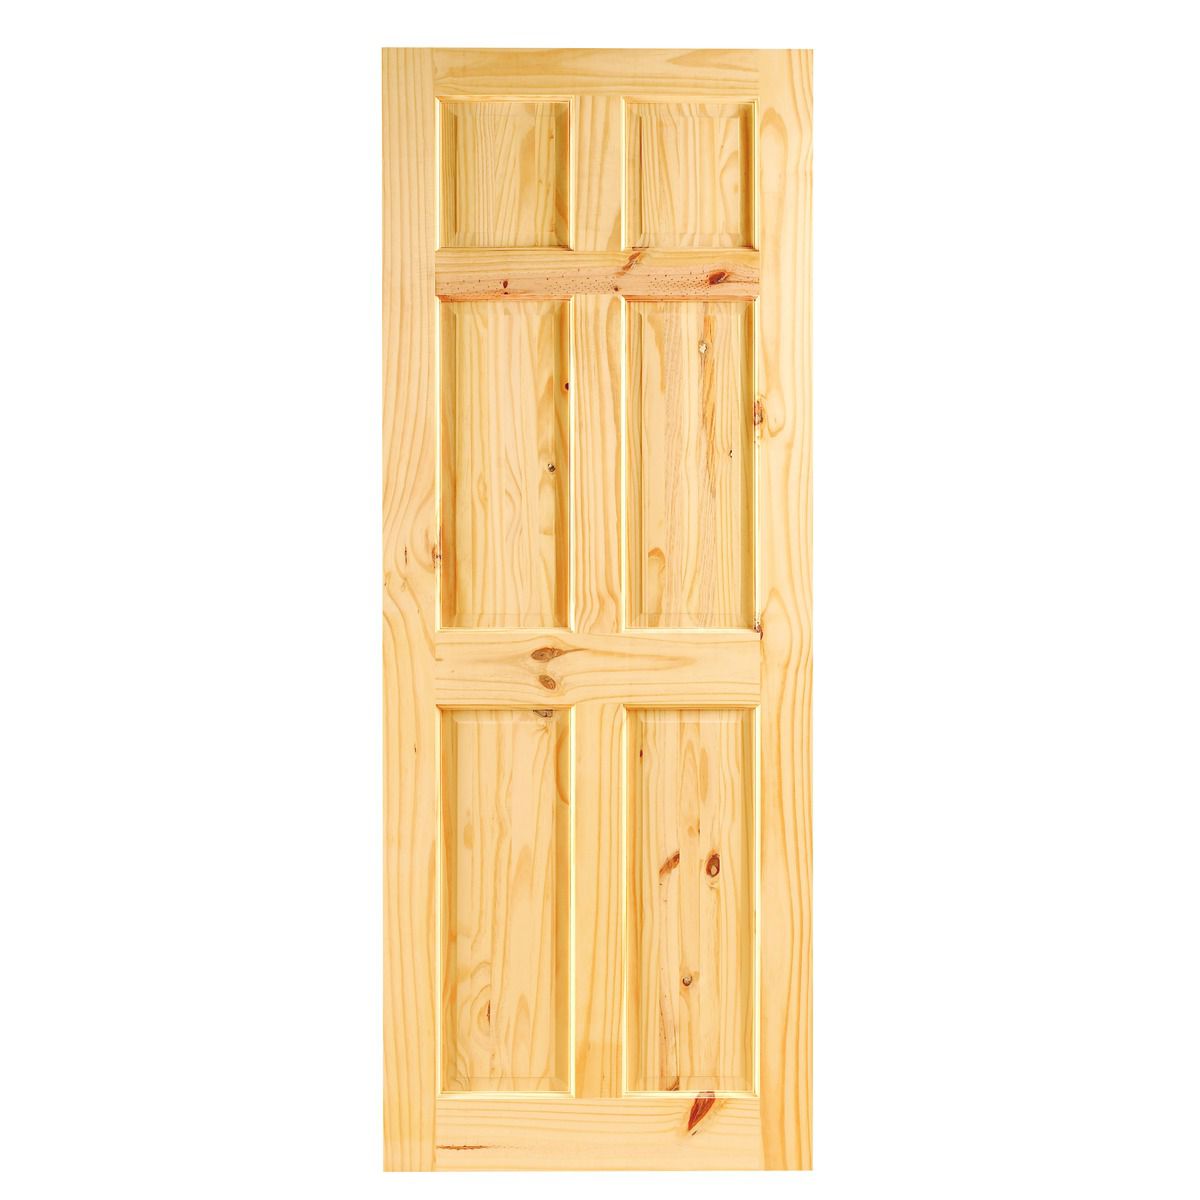 Image of Wickes Lincoln Knotty Pine 6 Panel Internal Door - 1981 x 838mm